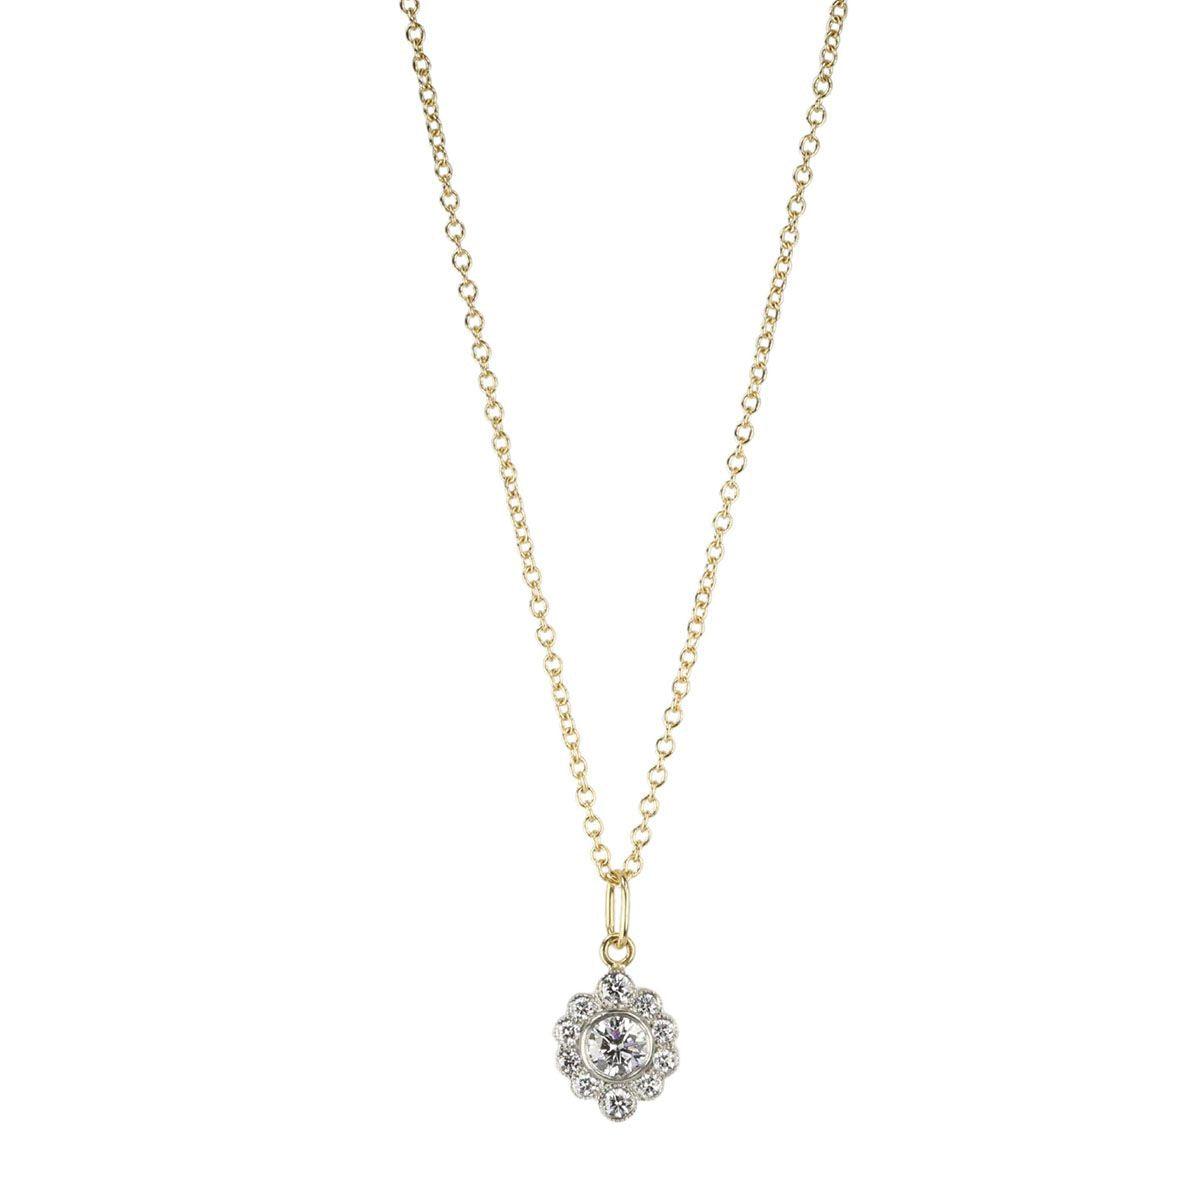 Anne Sportun Mixed Yellow &amp; White Gold &quot;Olivia&quot; Diamond Necklace